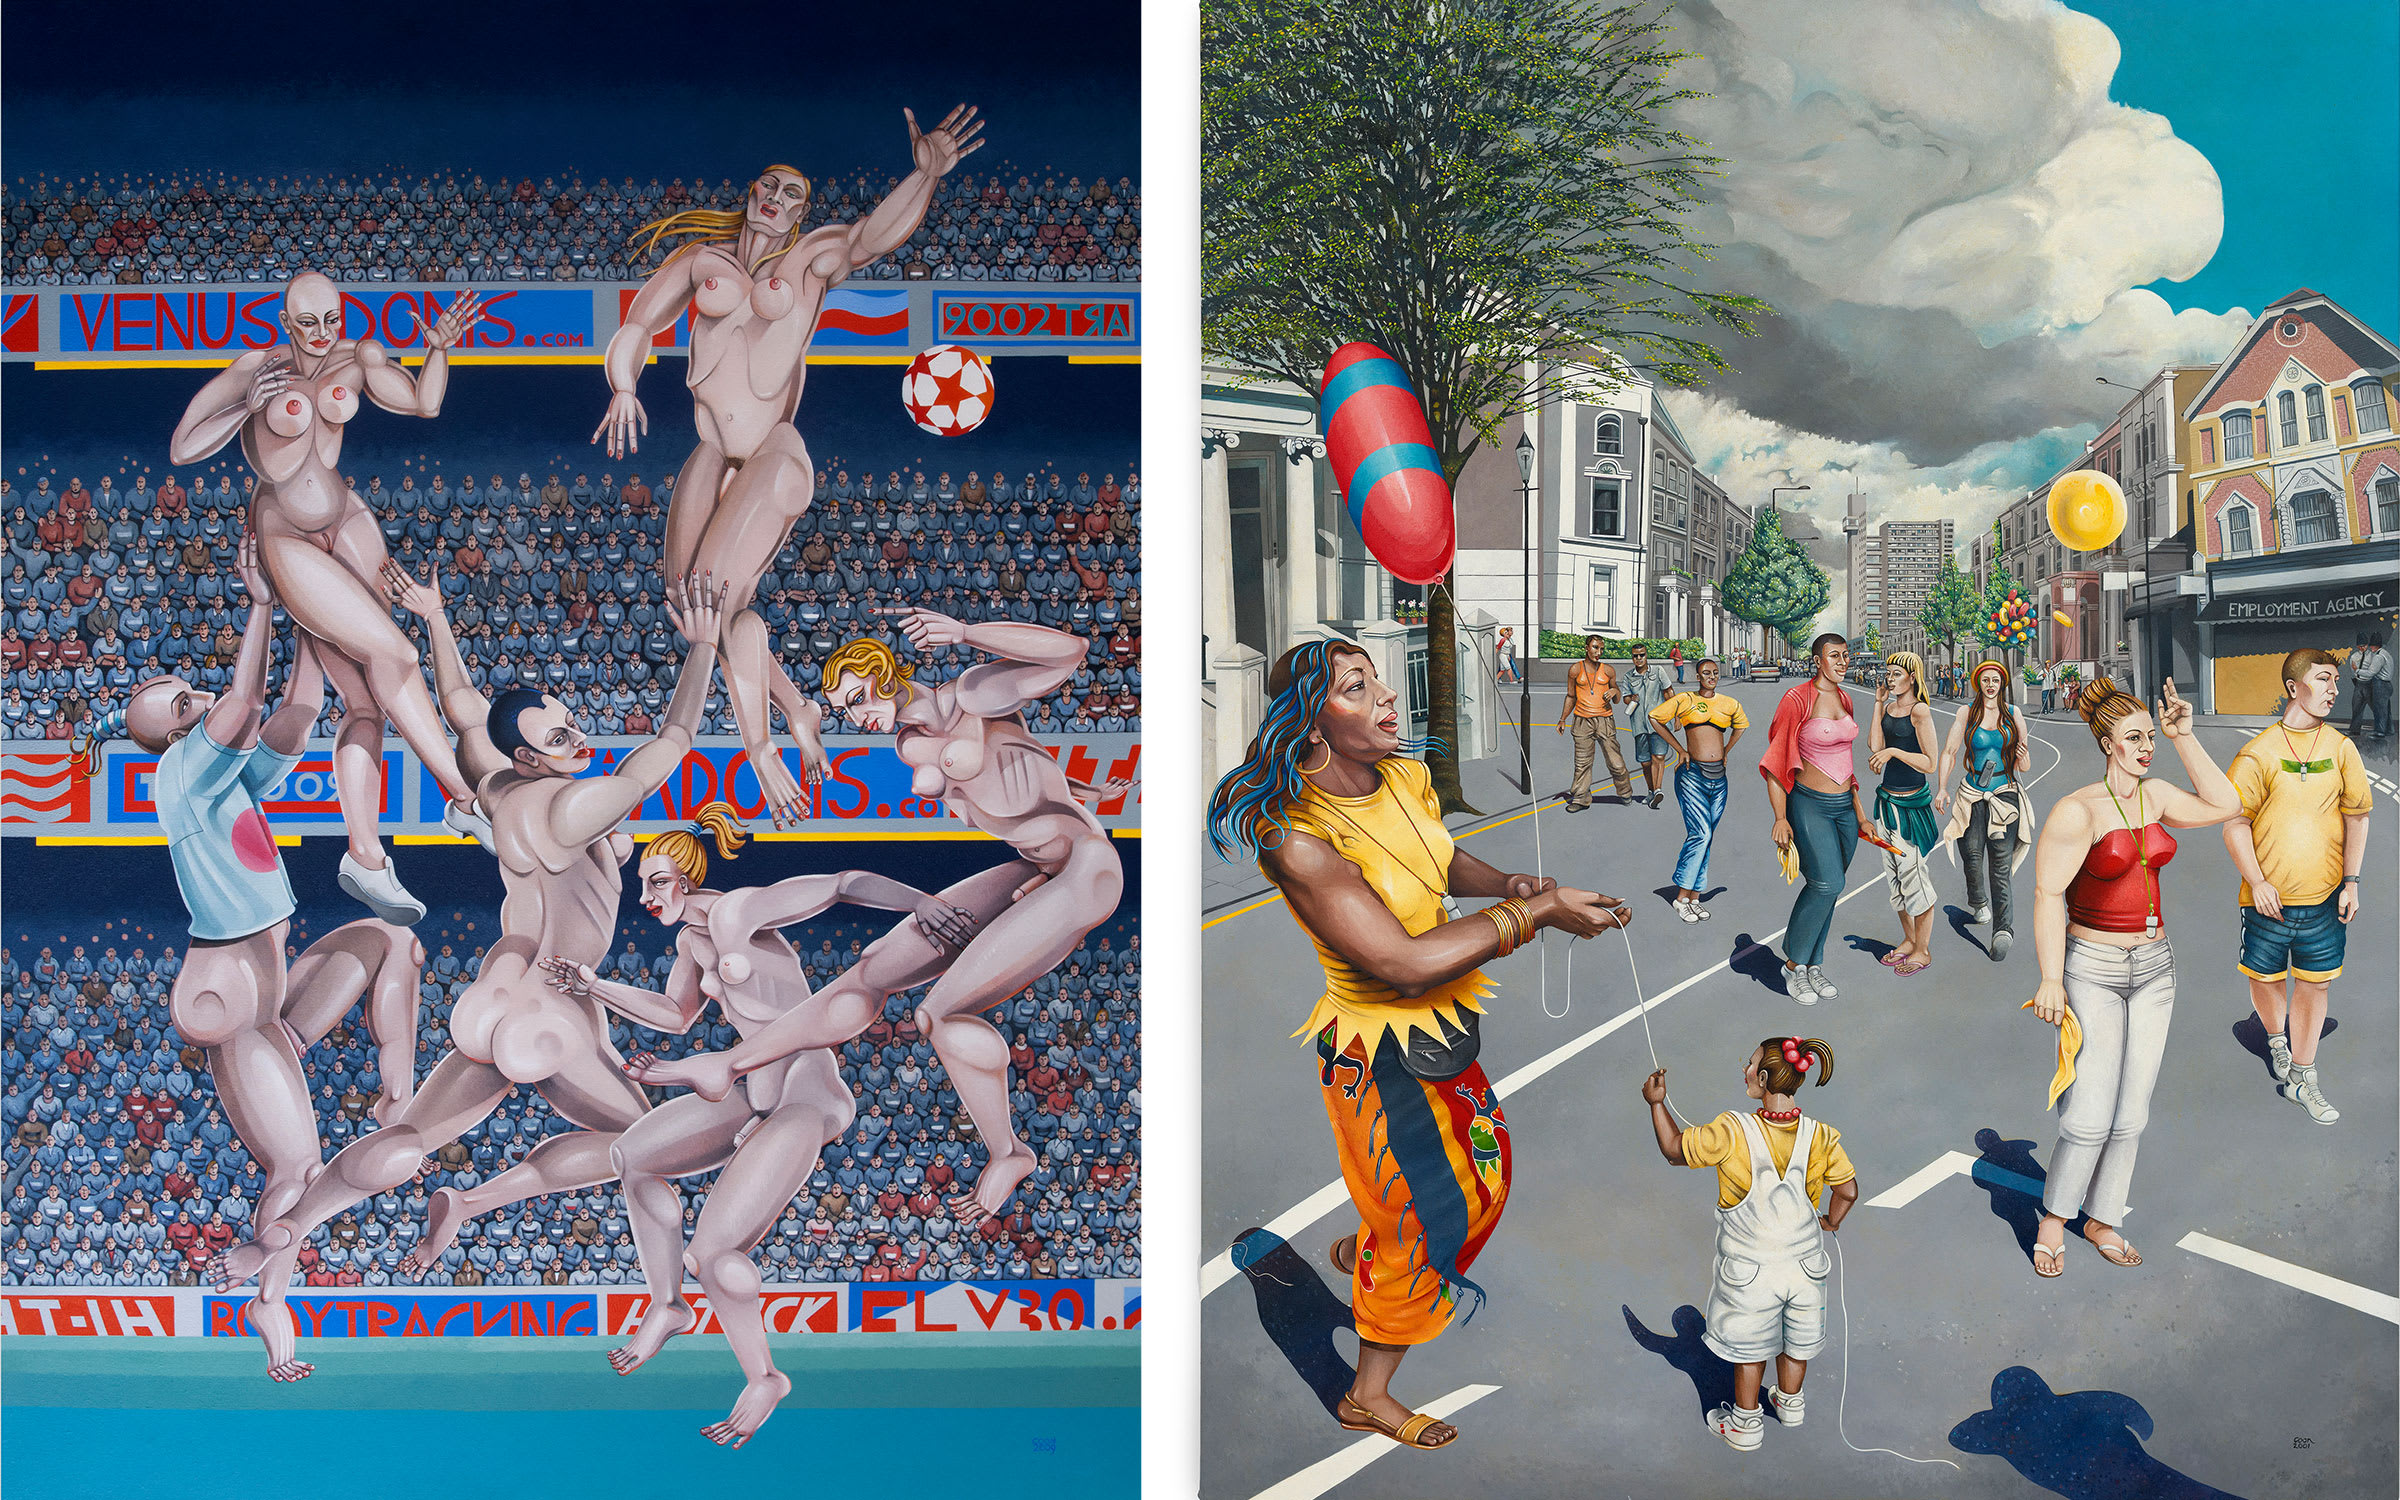 Left: Caroline Coon, A Sweet Lob from 25 Yards, 2009. Photo by Todd-White Art Photography. Courtesy of the artist and Stephen Friedman Gallery. Right: Caroline Coon, Carnival: Sunday Morning, August 26th 2000, 2001. Photo by Todd-White Art Photography. Courtesy of the artist and Stephen Friedman Gallery. 